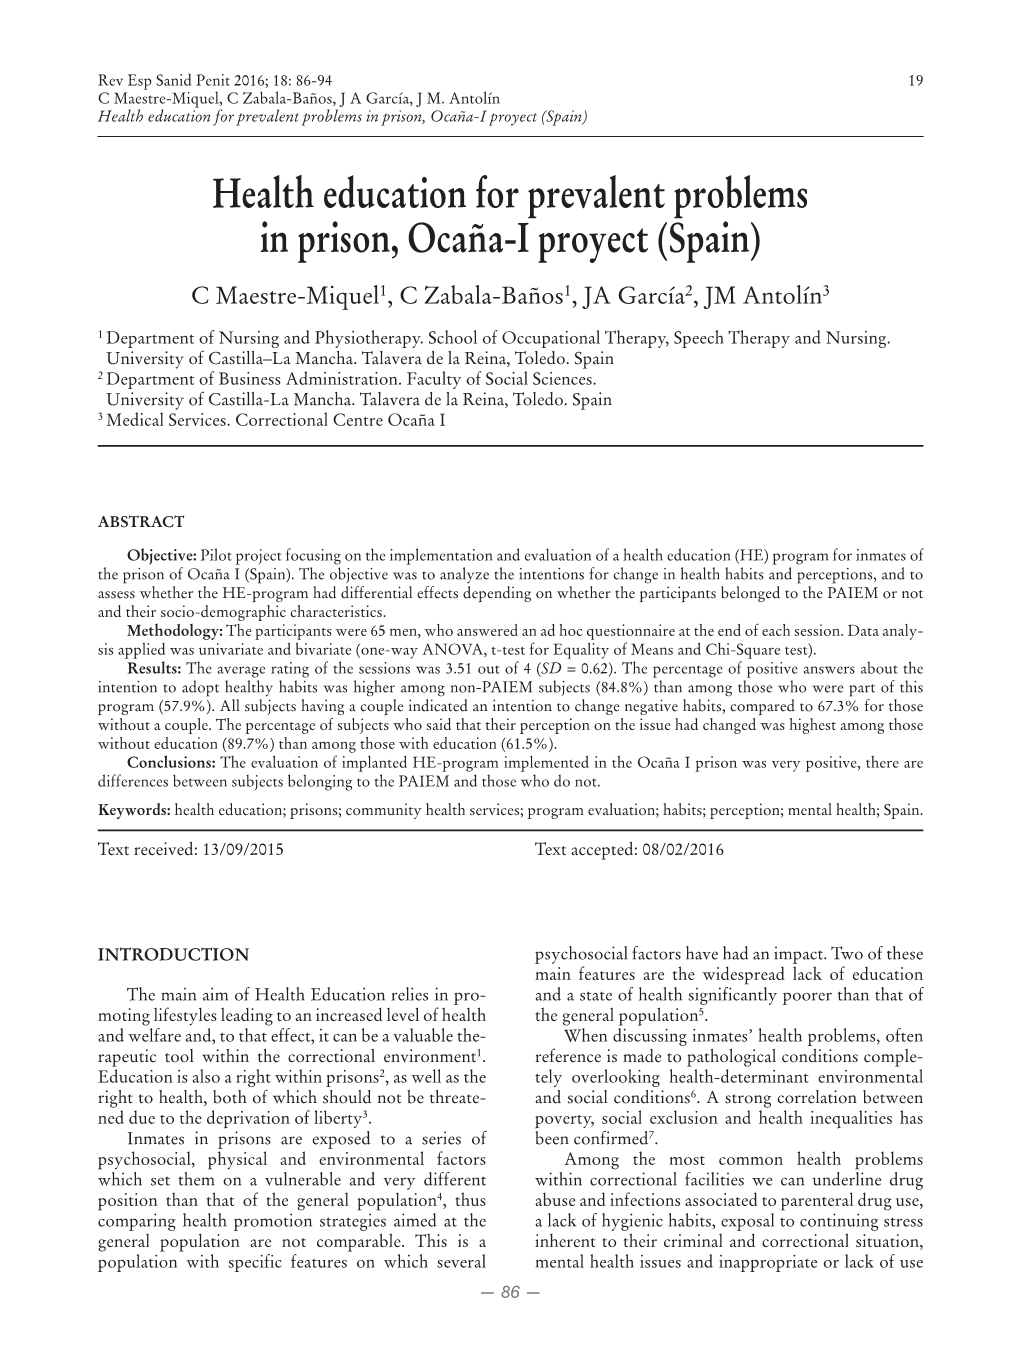 Health Education for Prevalent Problems in Prison, Ocaña-I Proyect (Spain)